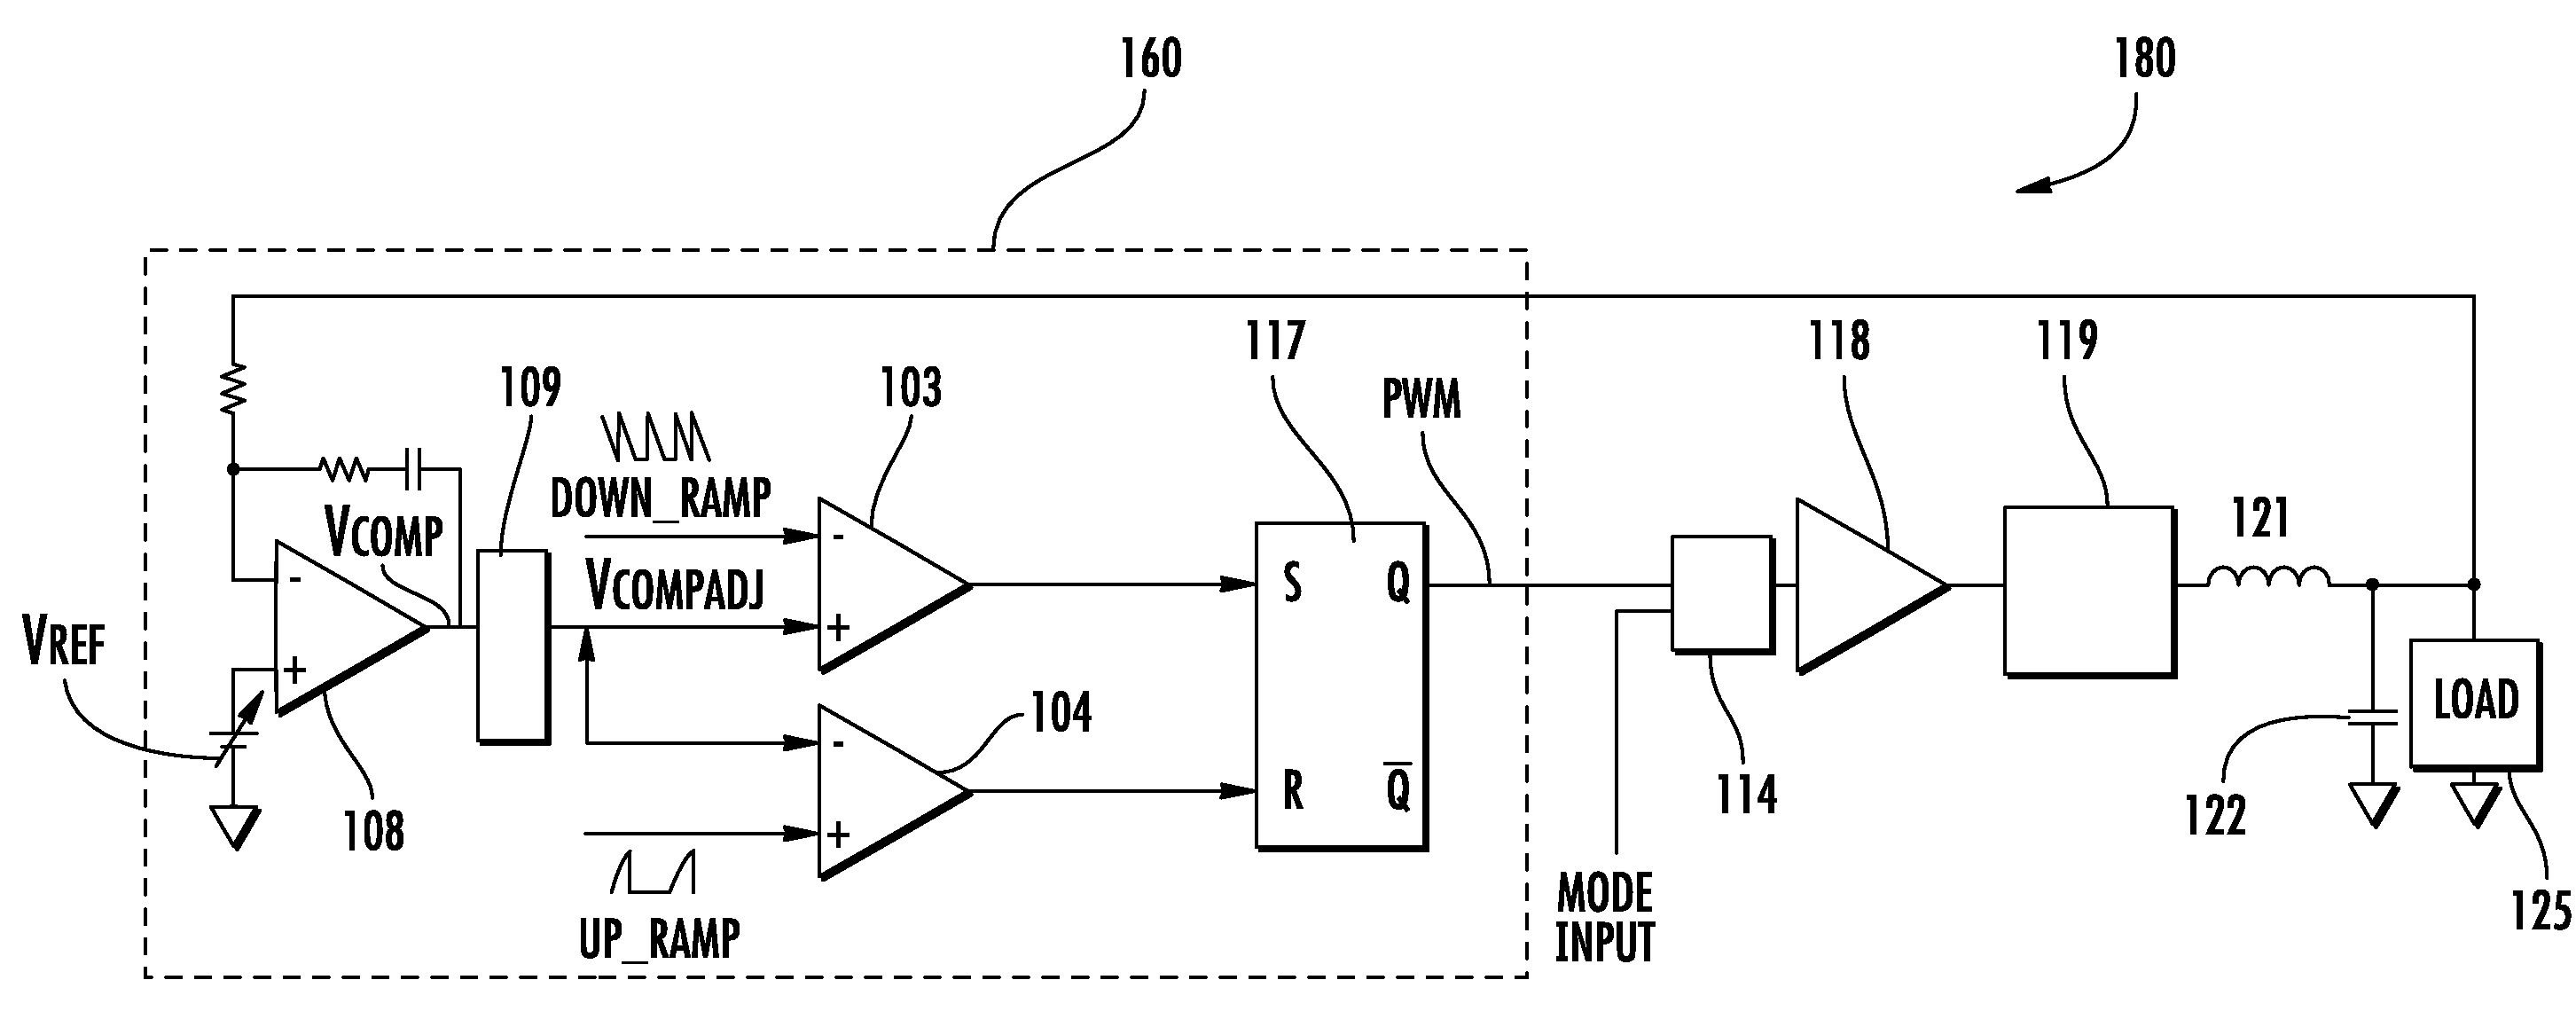 Controller having comp node voltage shift cancellation for improved discontinuous conduction mode (DCM) regulator performance and related methods